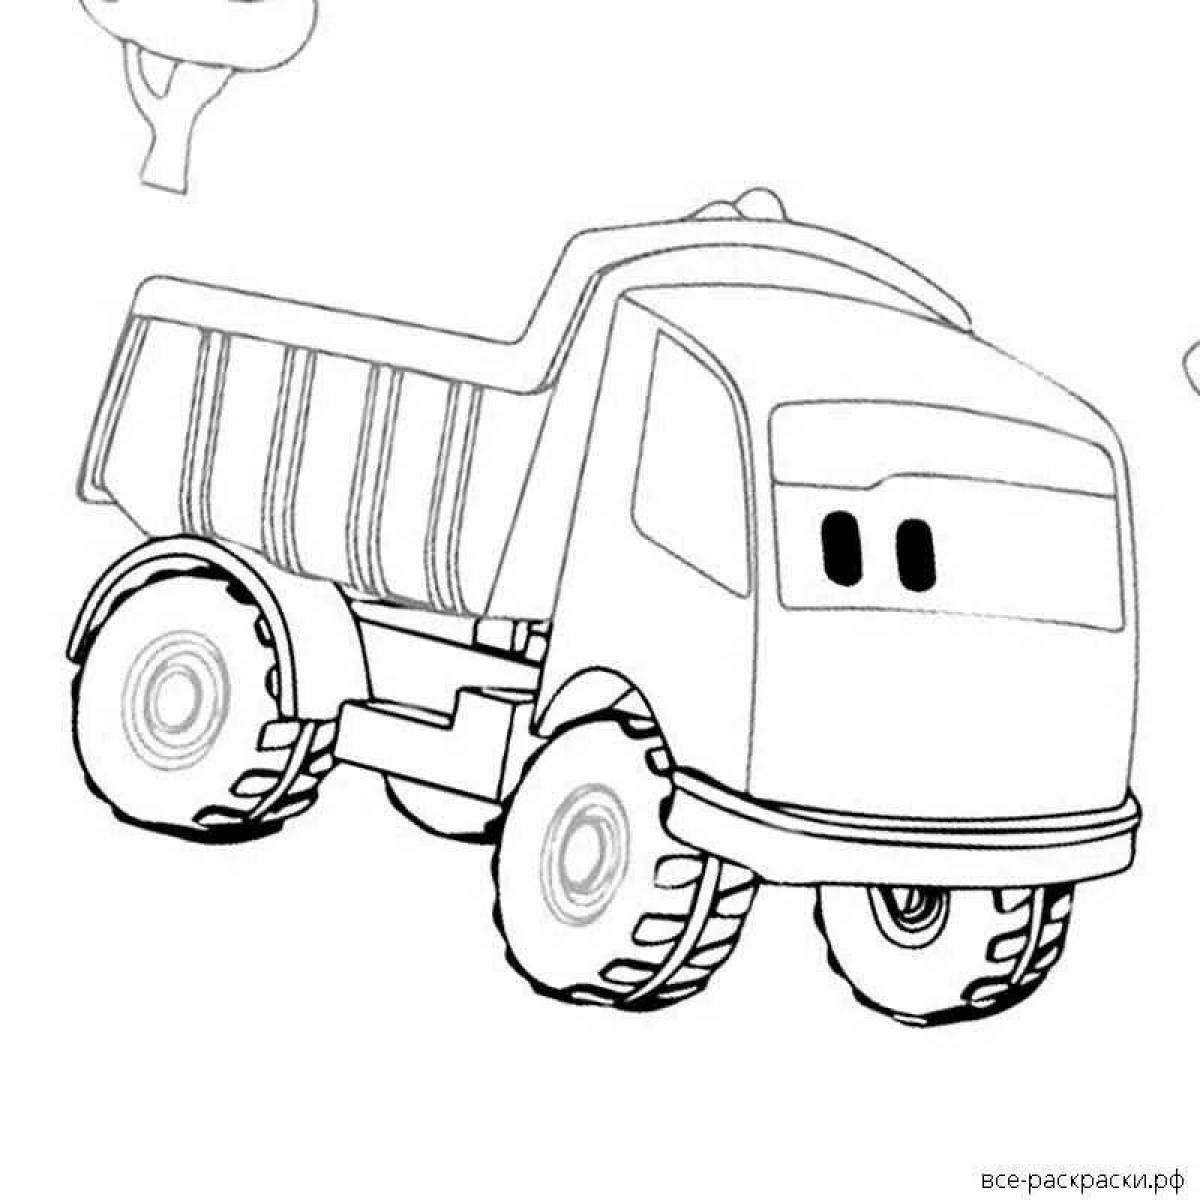 Glowing lion truck coloring page